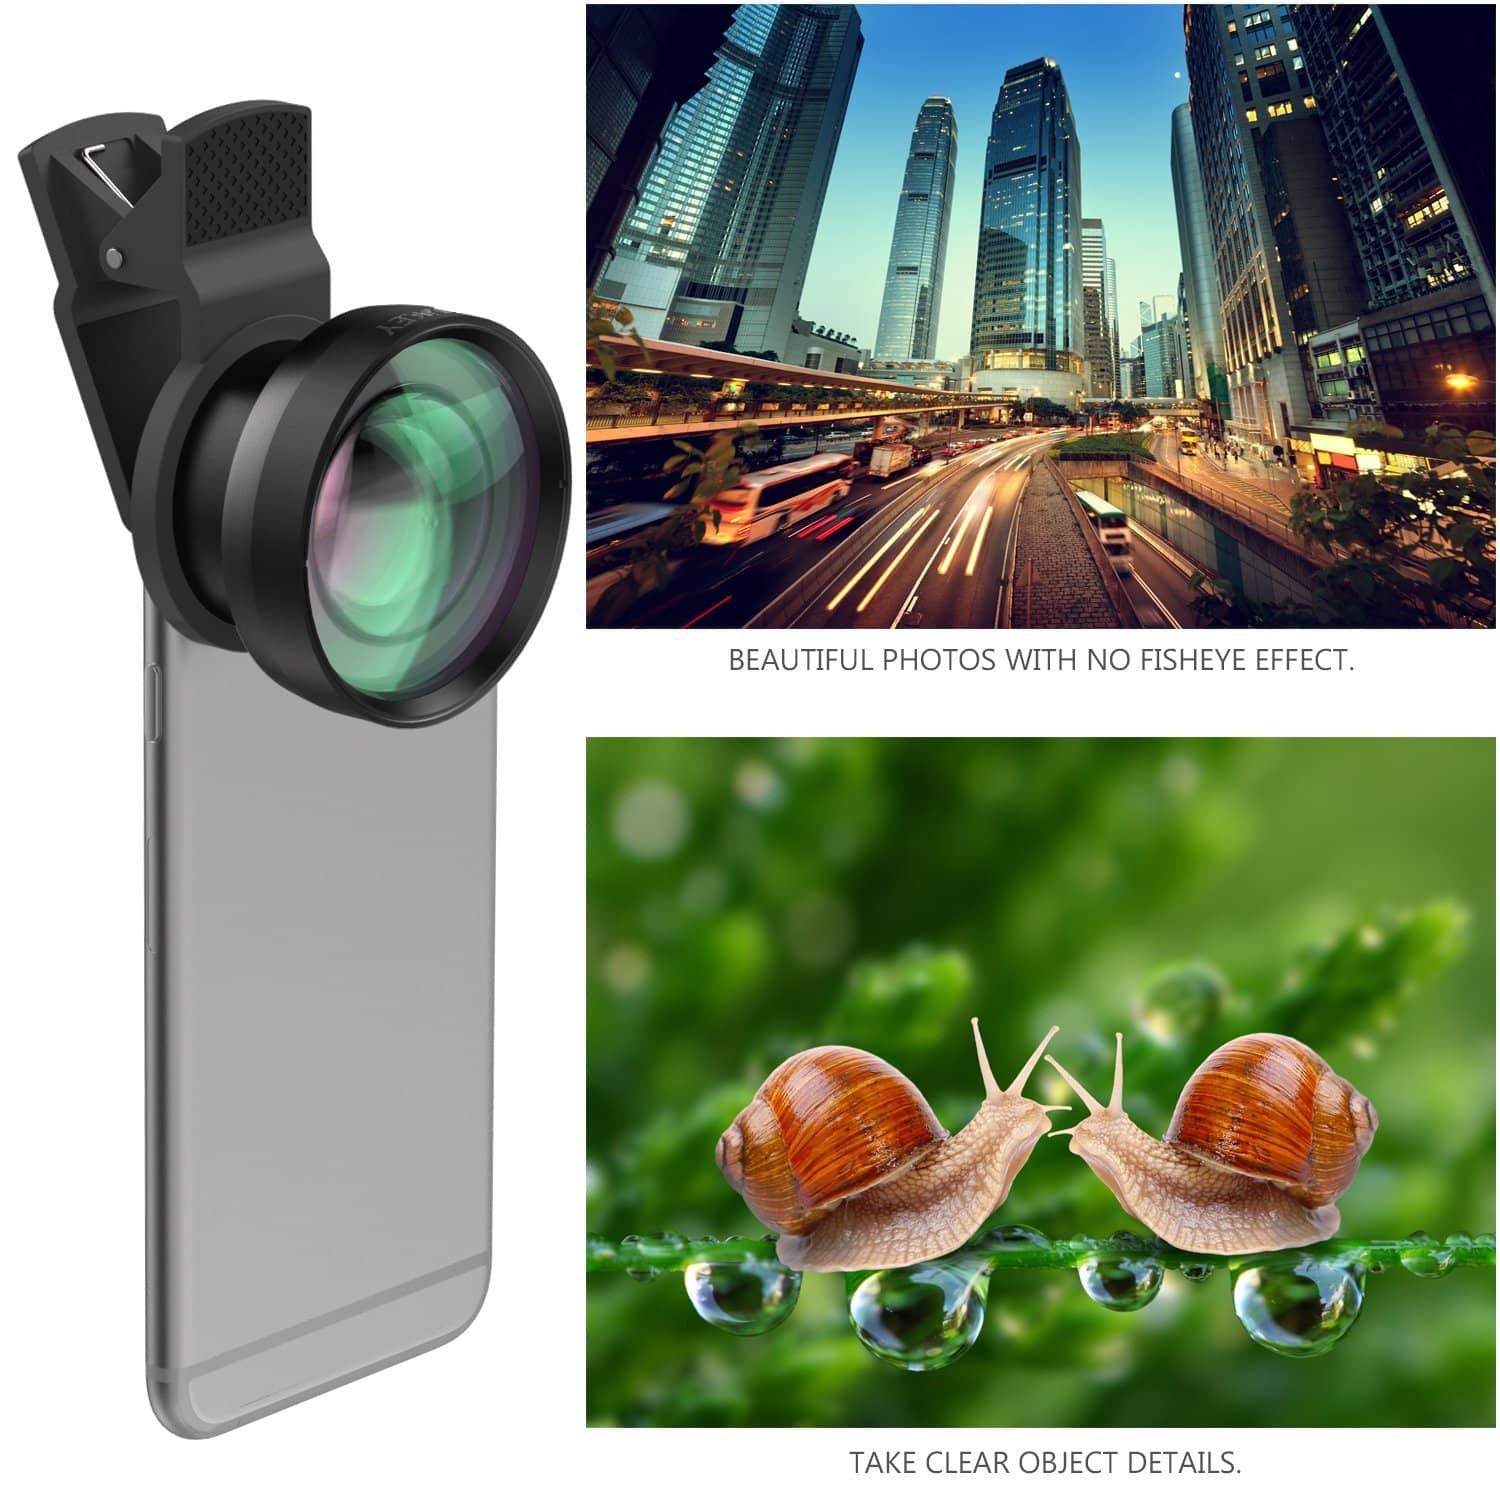 AUKEY PL-WD06  2 in 1 Clip Ora Lens Kit On with 0.45X Wide Angle + 15X Macro Lens - Aukey Malaysia Official Store